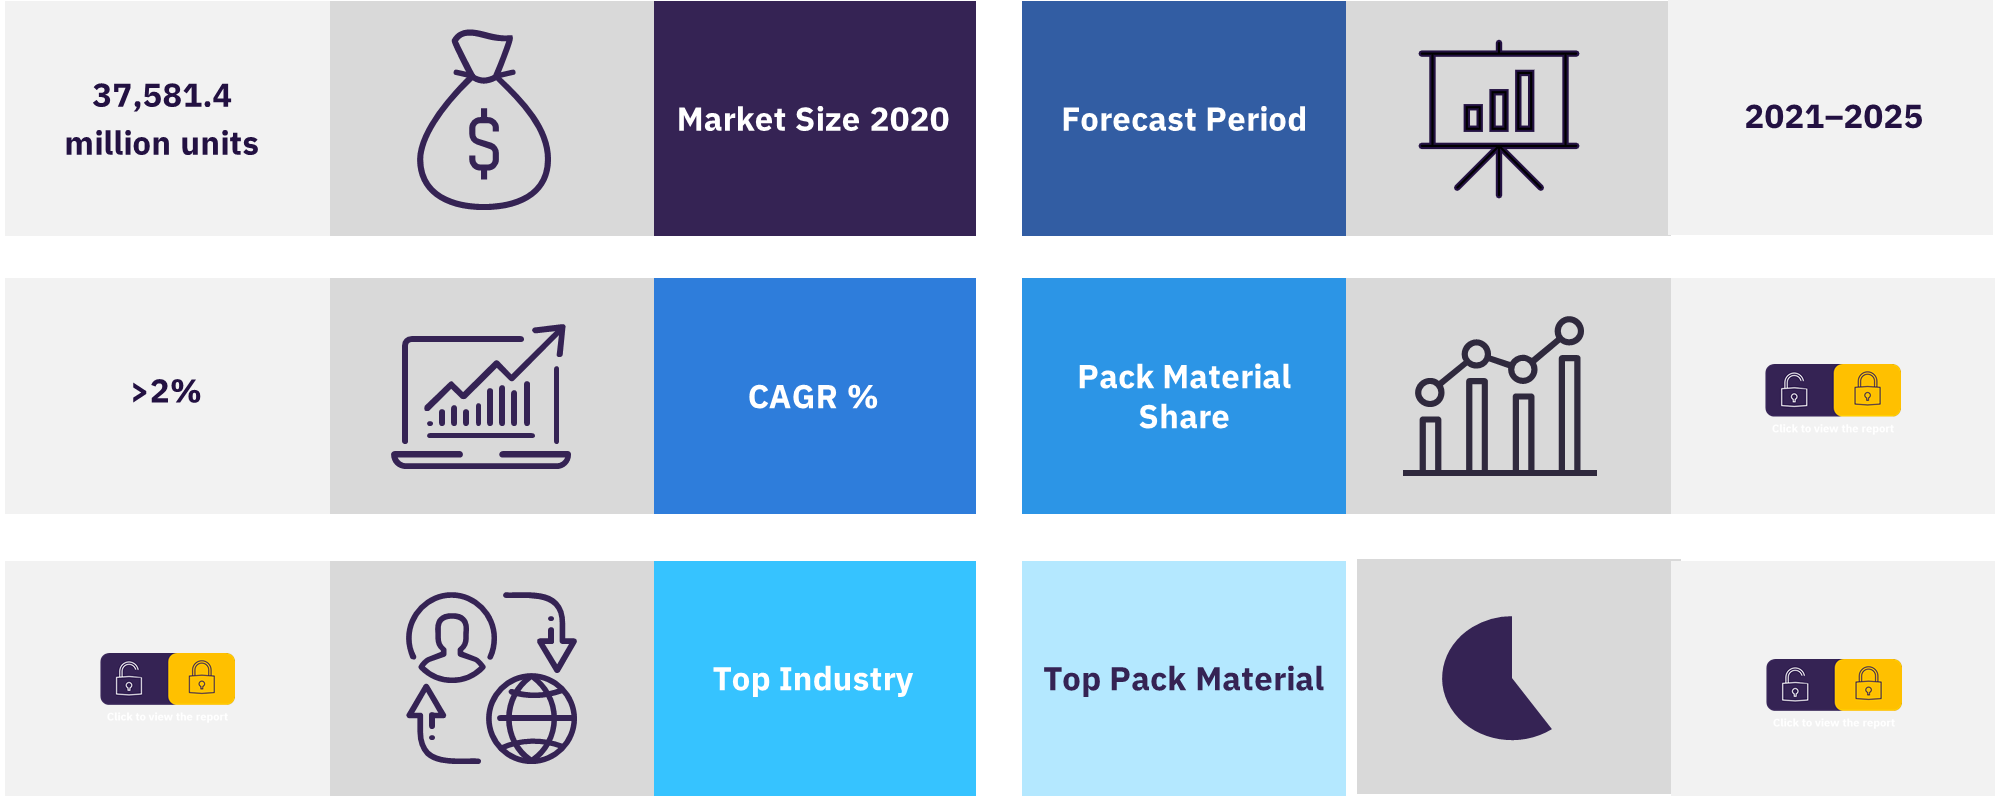 Overview of the packaging market in South Africa